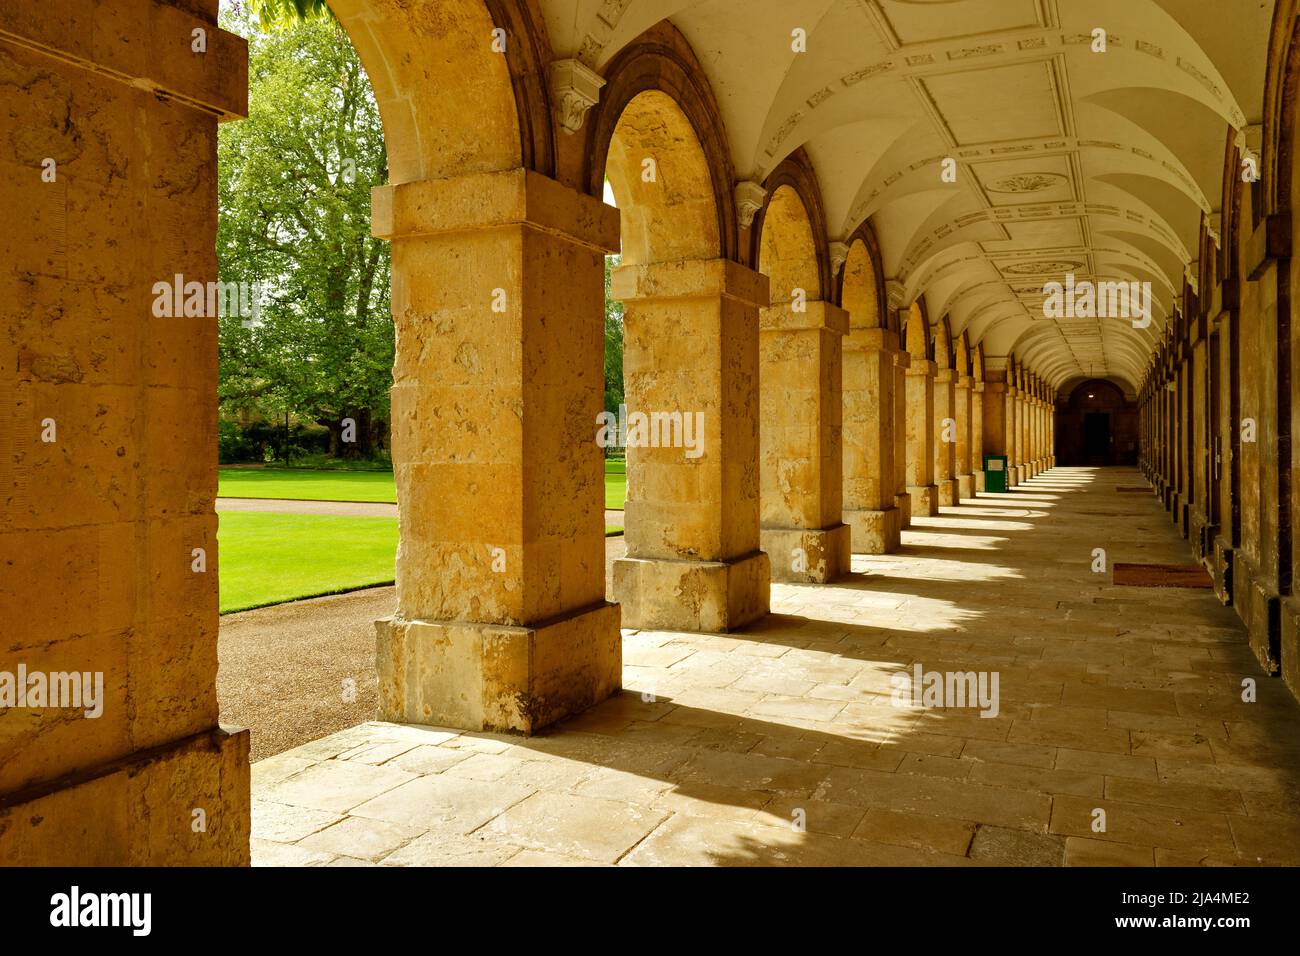 OXFORD CITY ENGLAND MAGDALEN COLLEGE CLOISTERS AND ARCHES IN THE NEW BUILDING Stock Photo